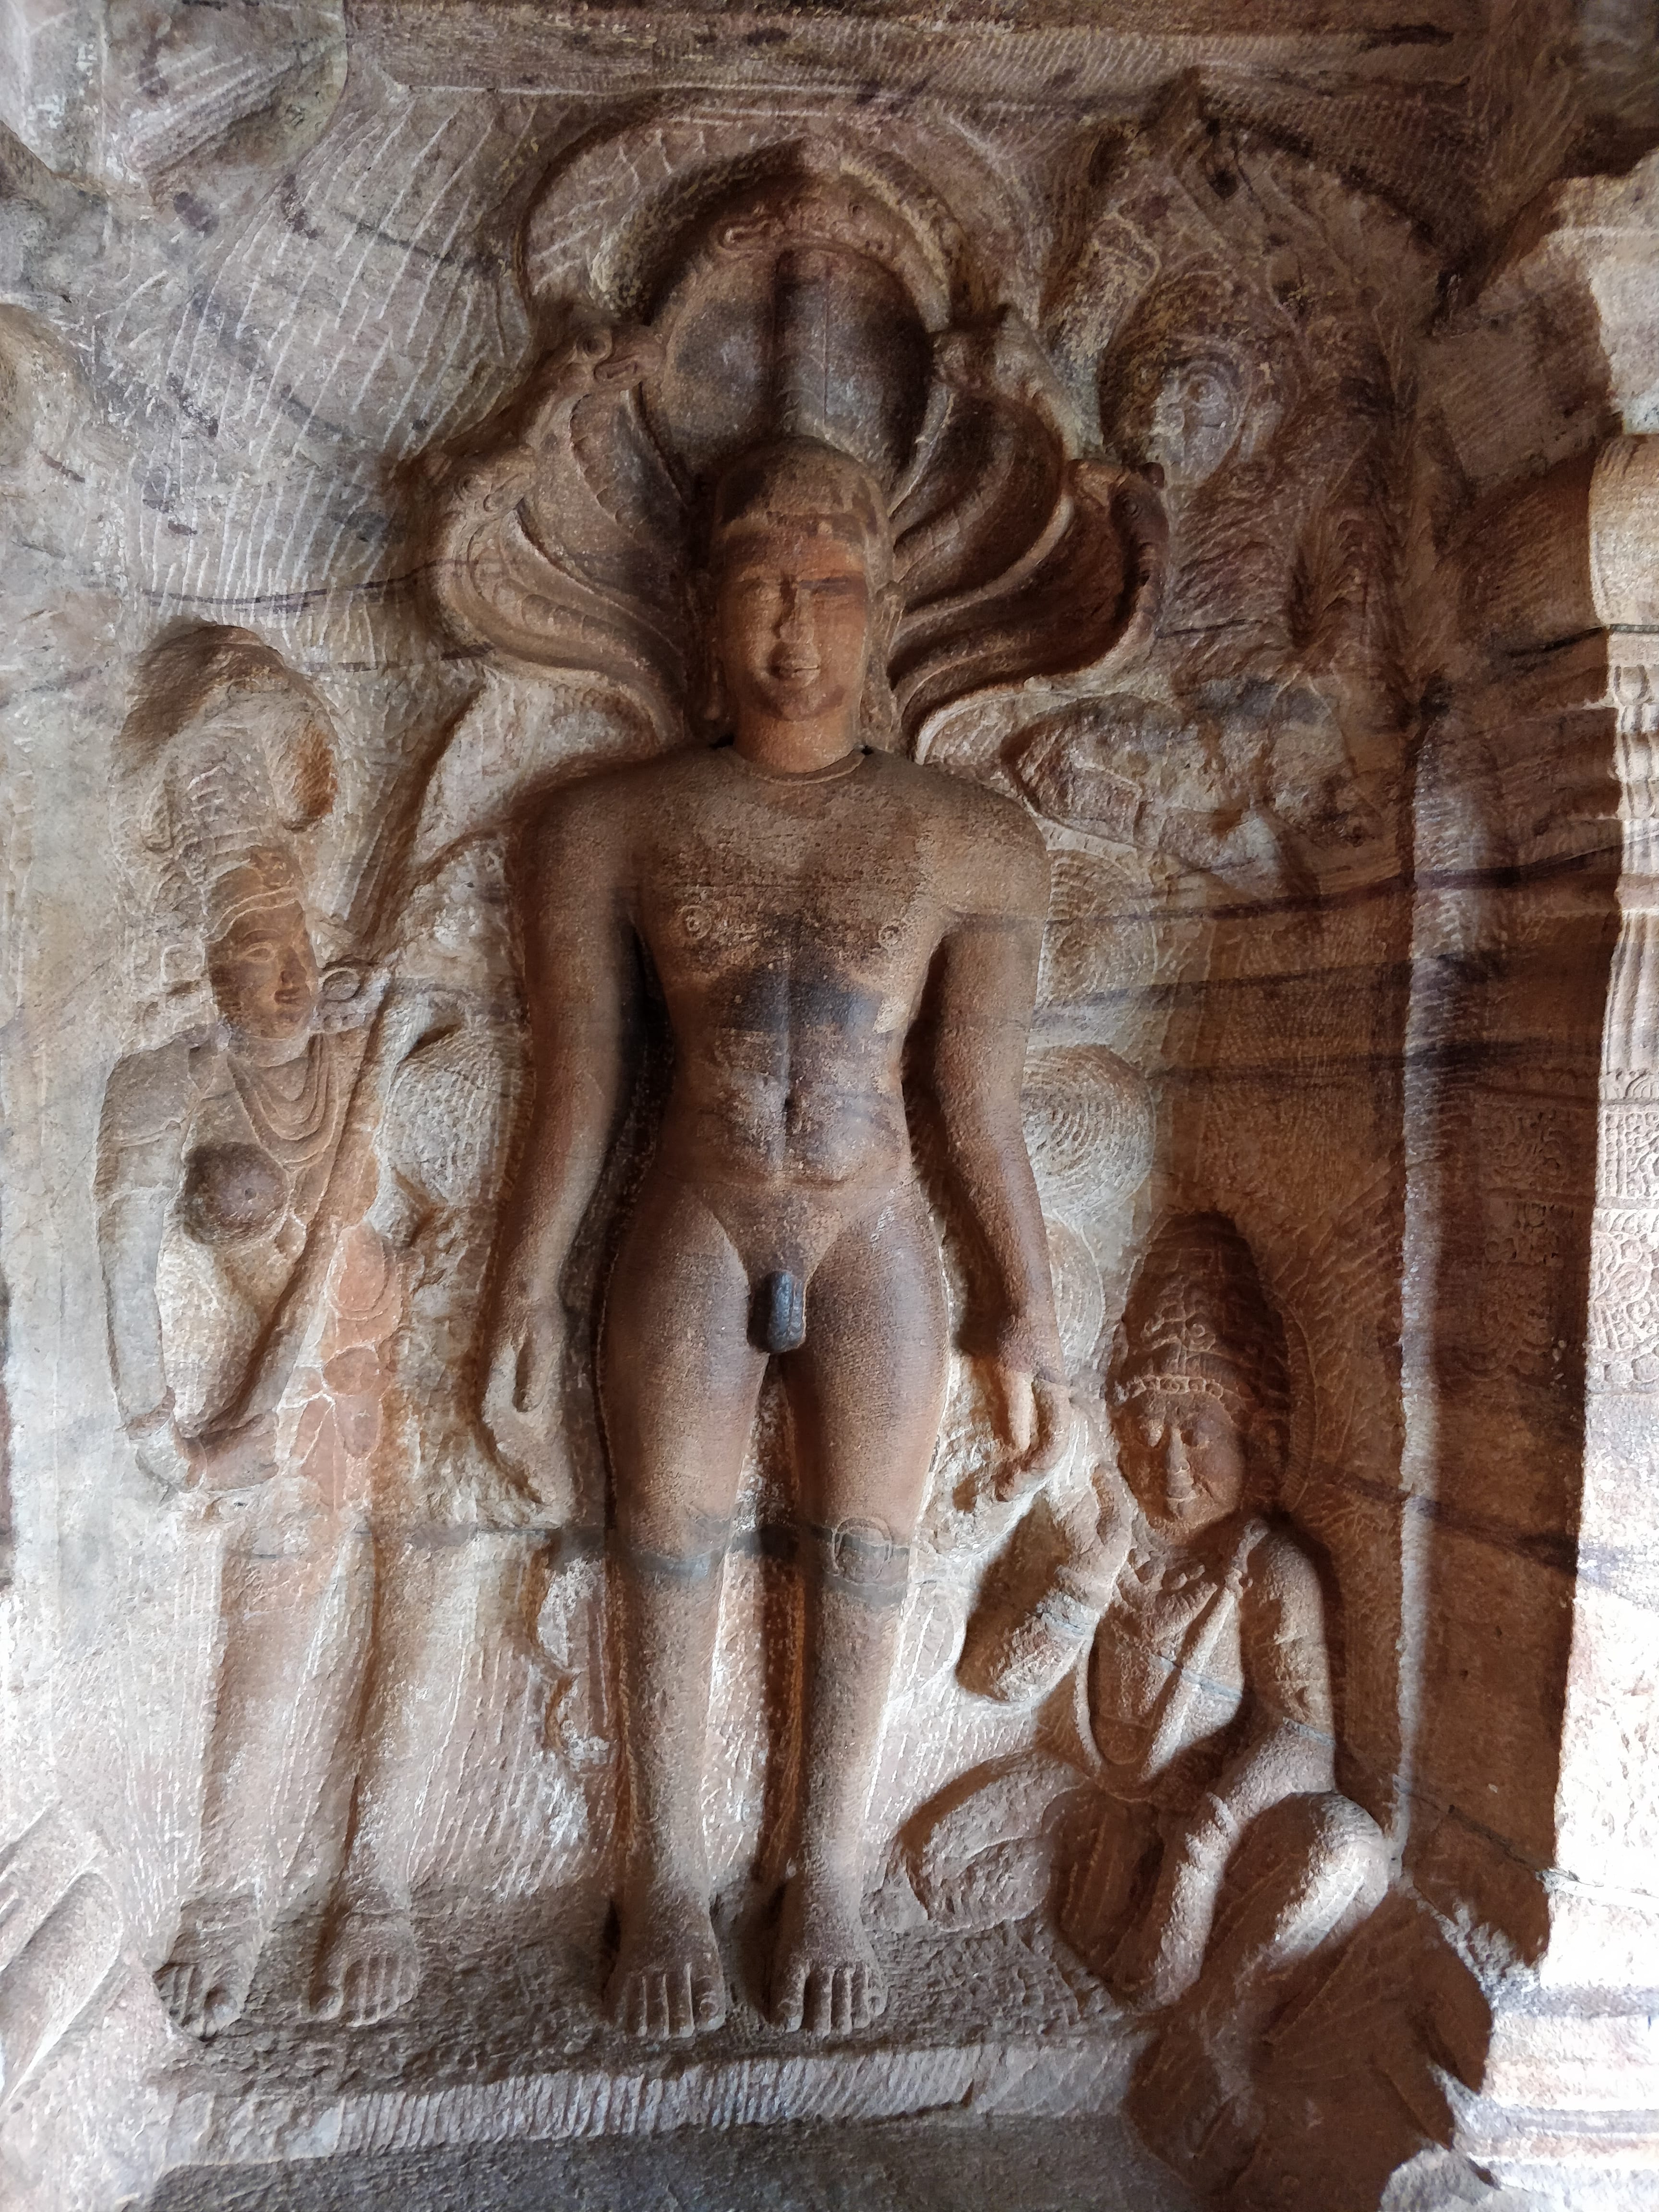 fourth cave is a jain temple